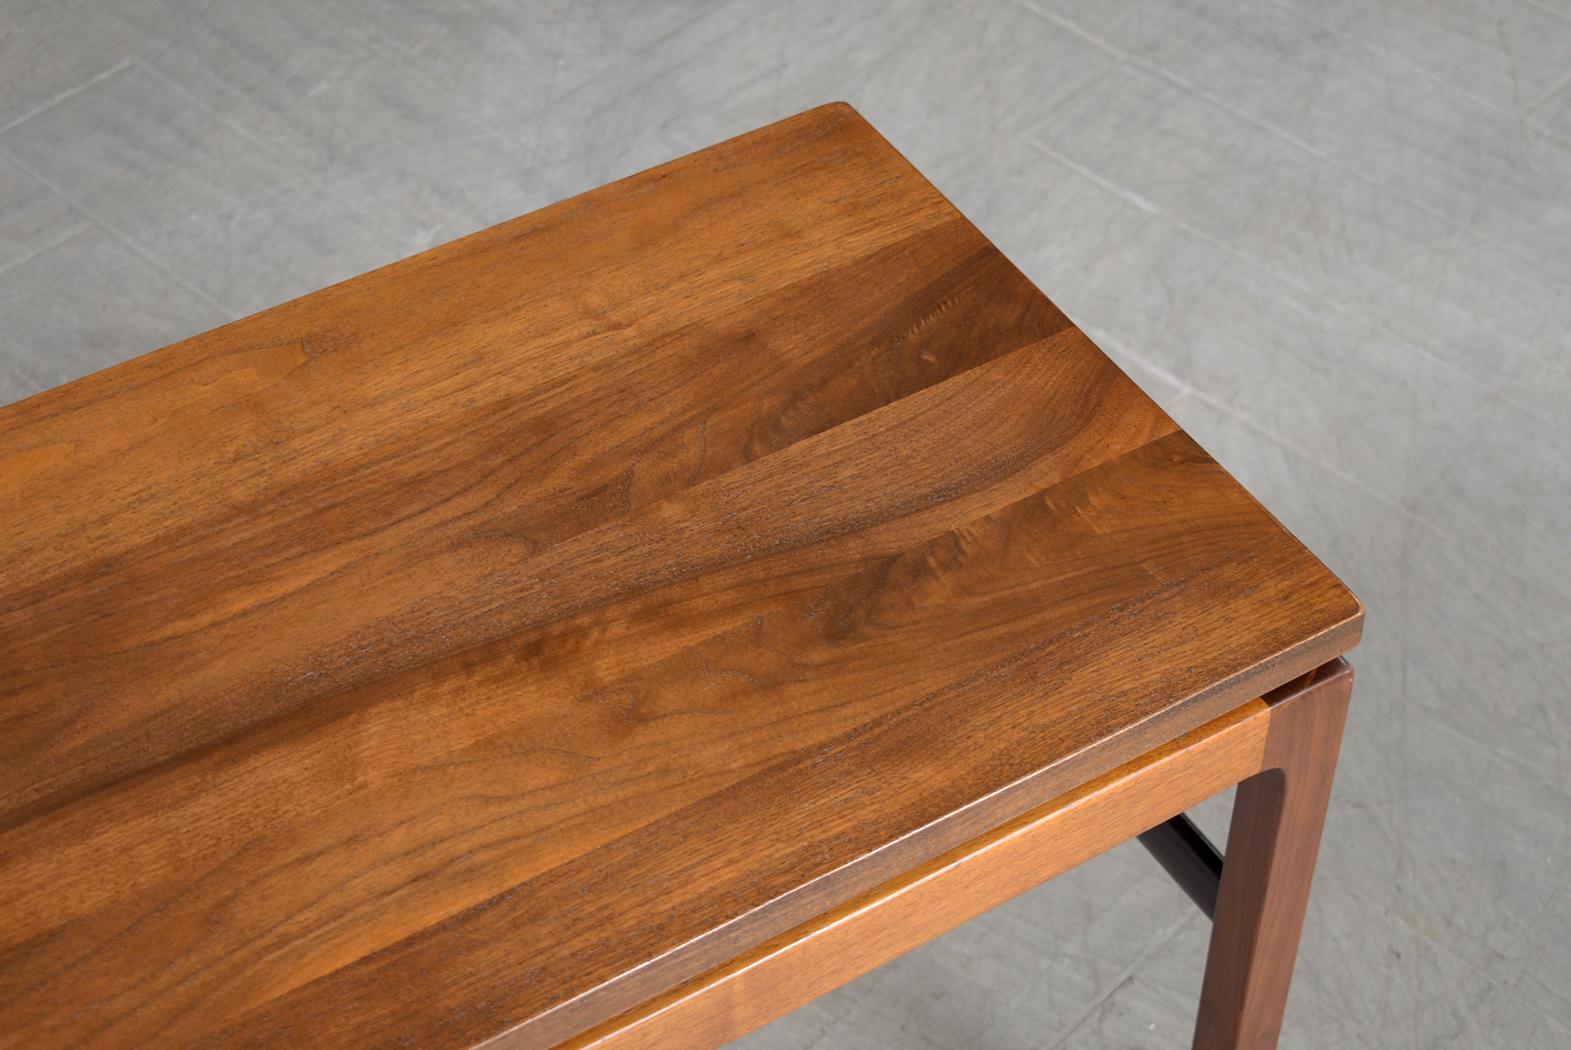 1960s Mid-Century Modern Walnut Side Table: Restored with Ebonized Accents For Sale 1